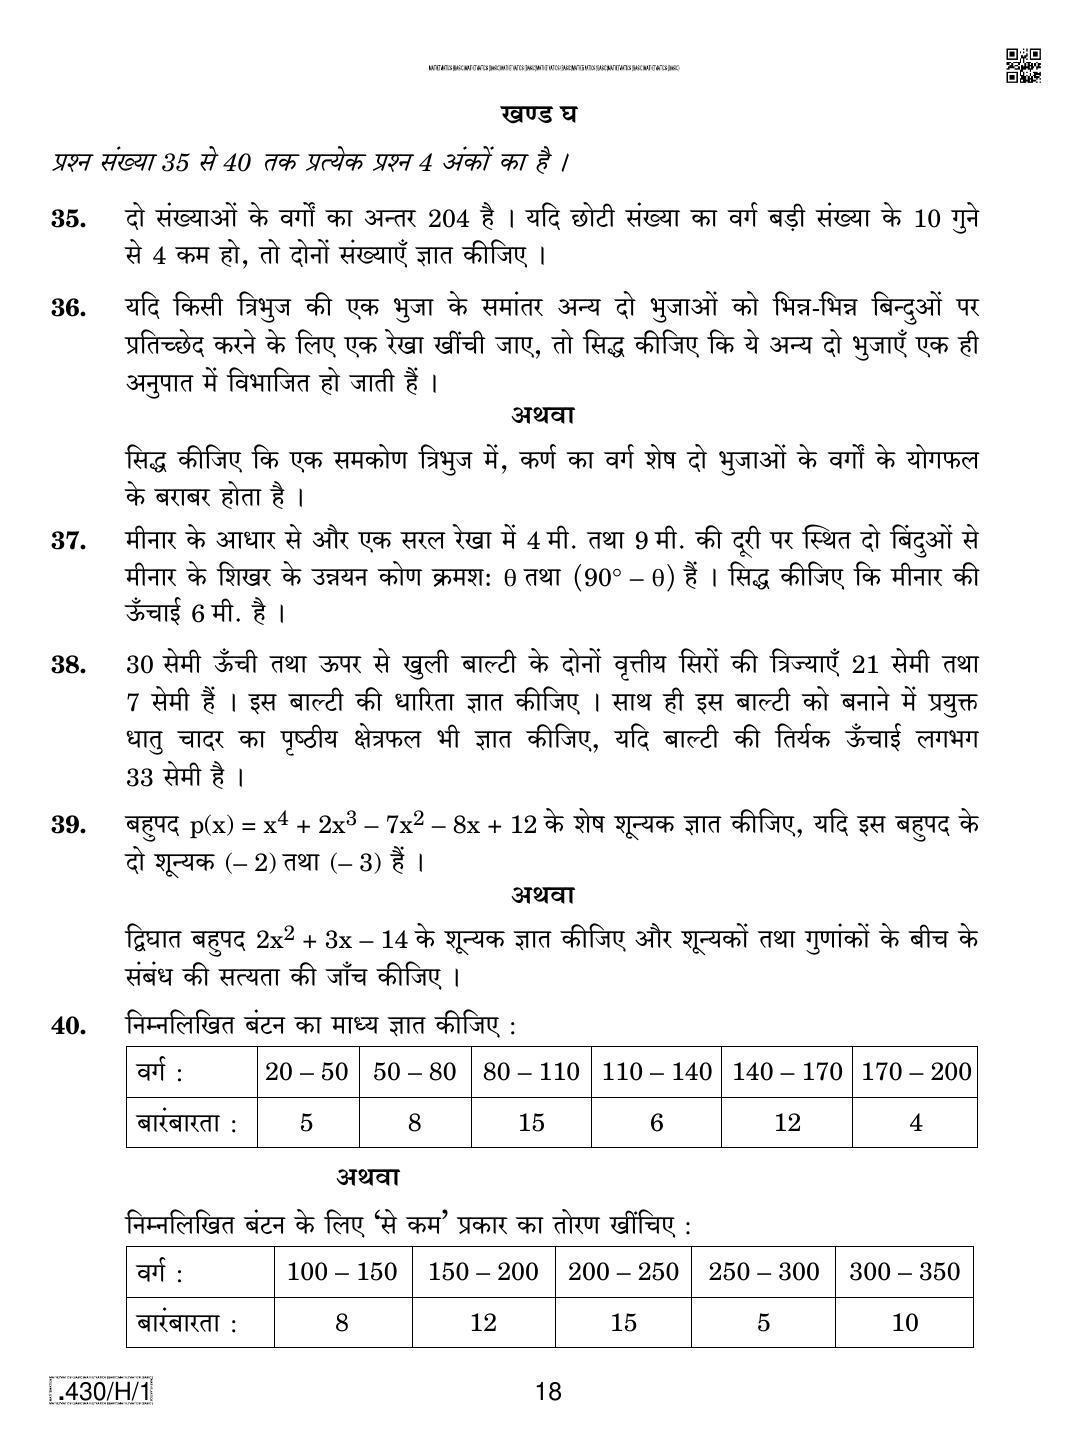 CBSE Class 10 430-C-1 - Maths (Basic) 2020 Compartment Question Paper - Page 18